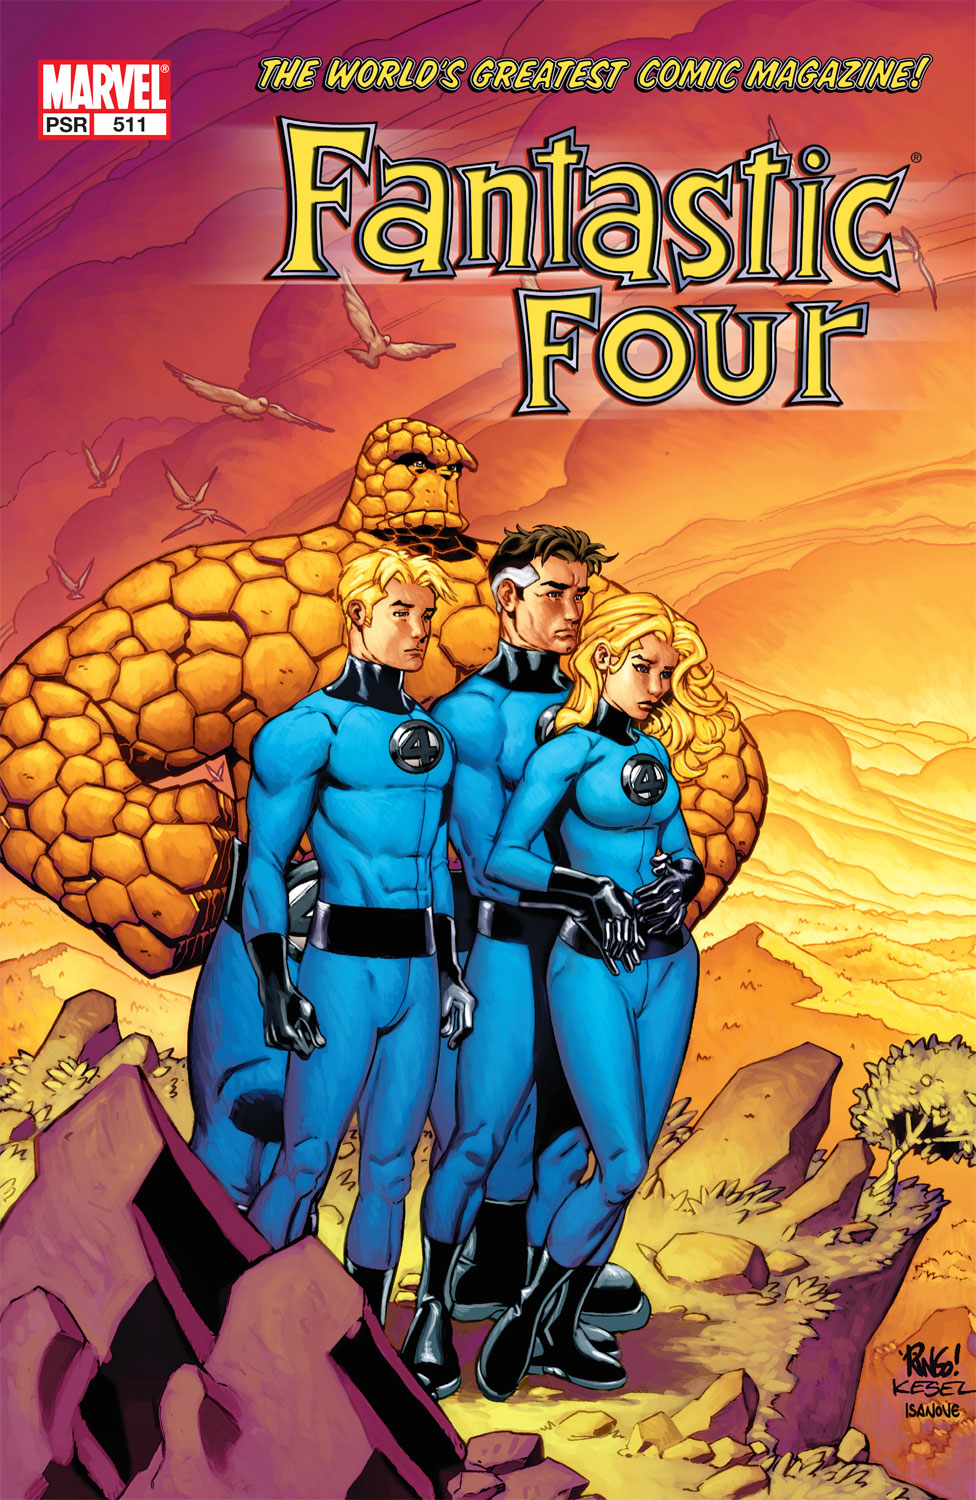 Read online Fantastic Four (1961) comic -  Issue #511 - 1